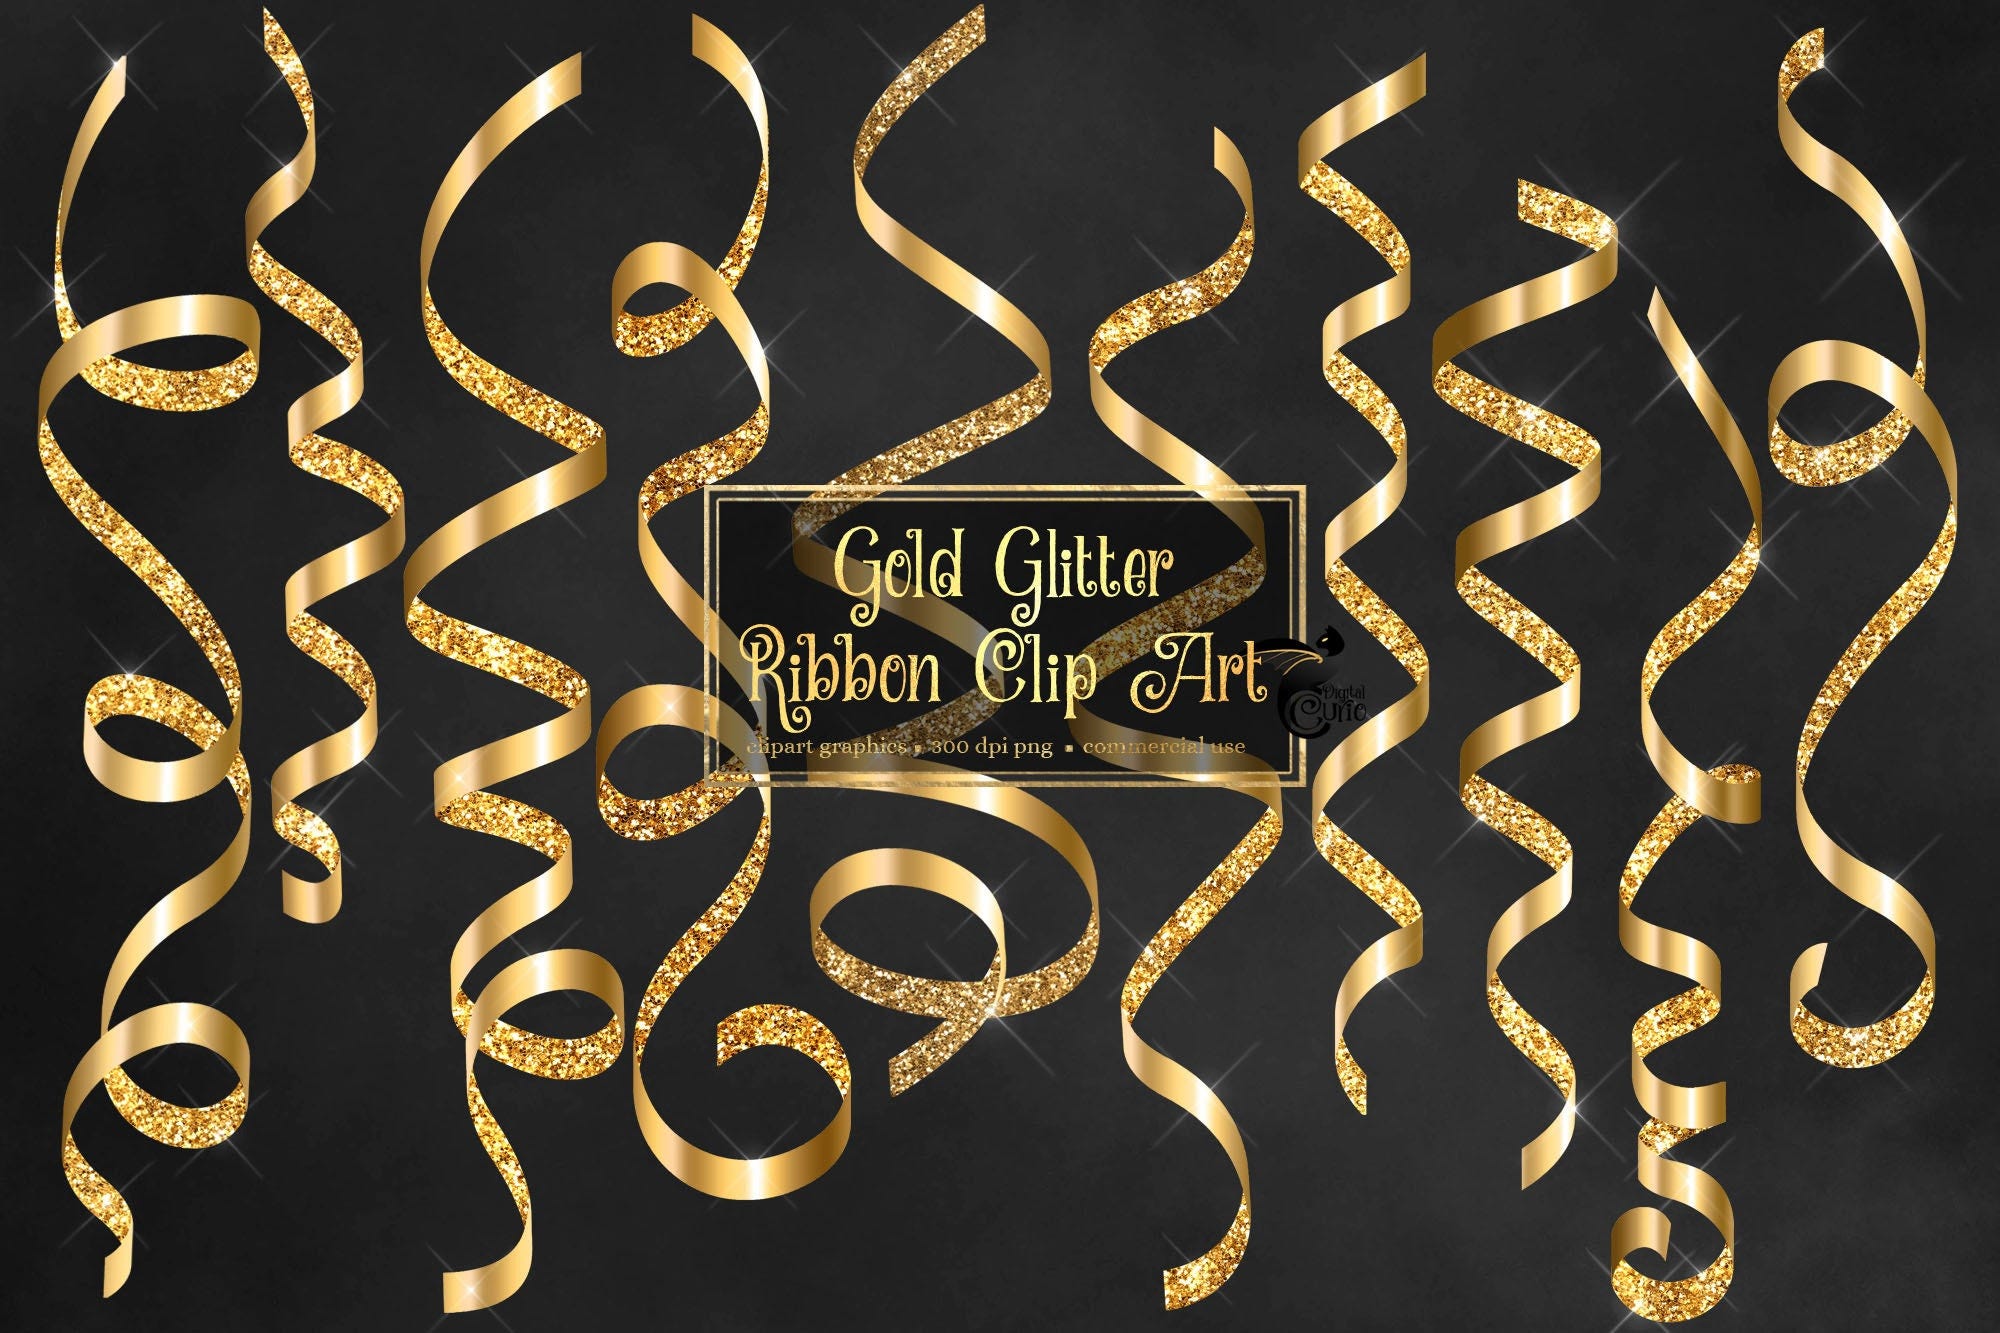 Gold Glitter Ribbon Clip Art - curling ribbons in png format instant download for commercial use